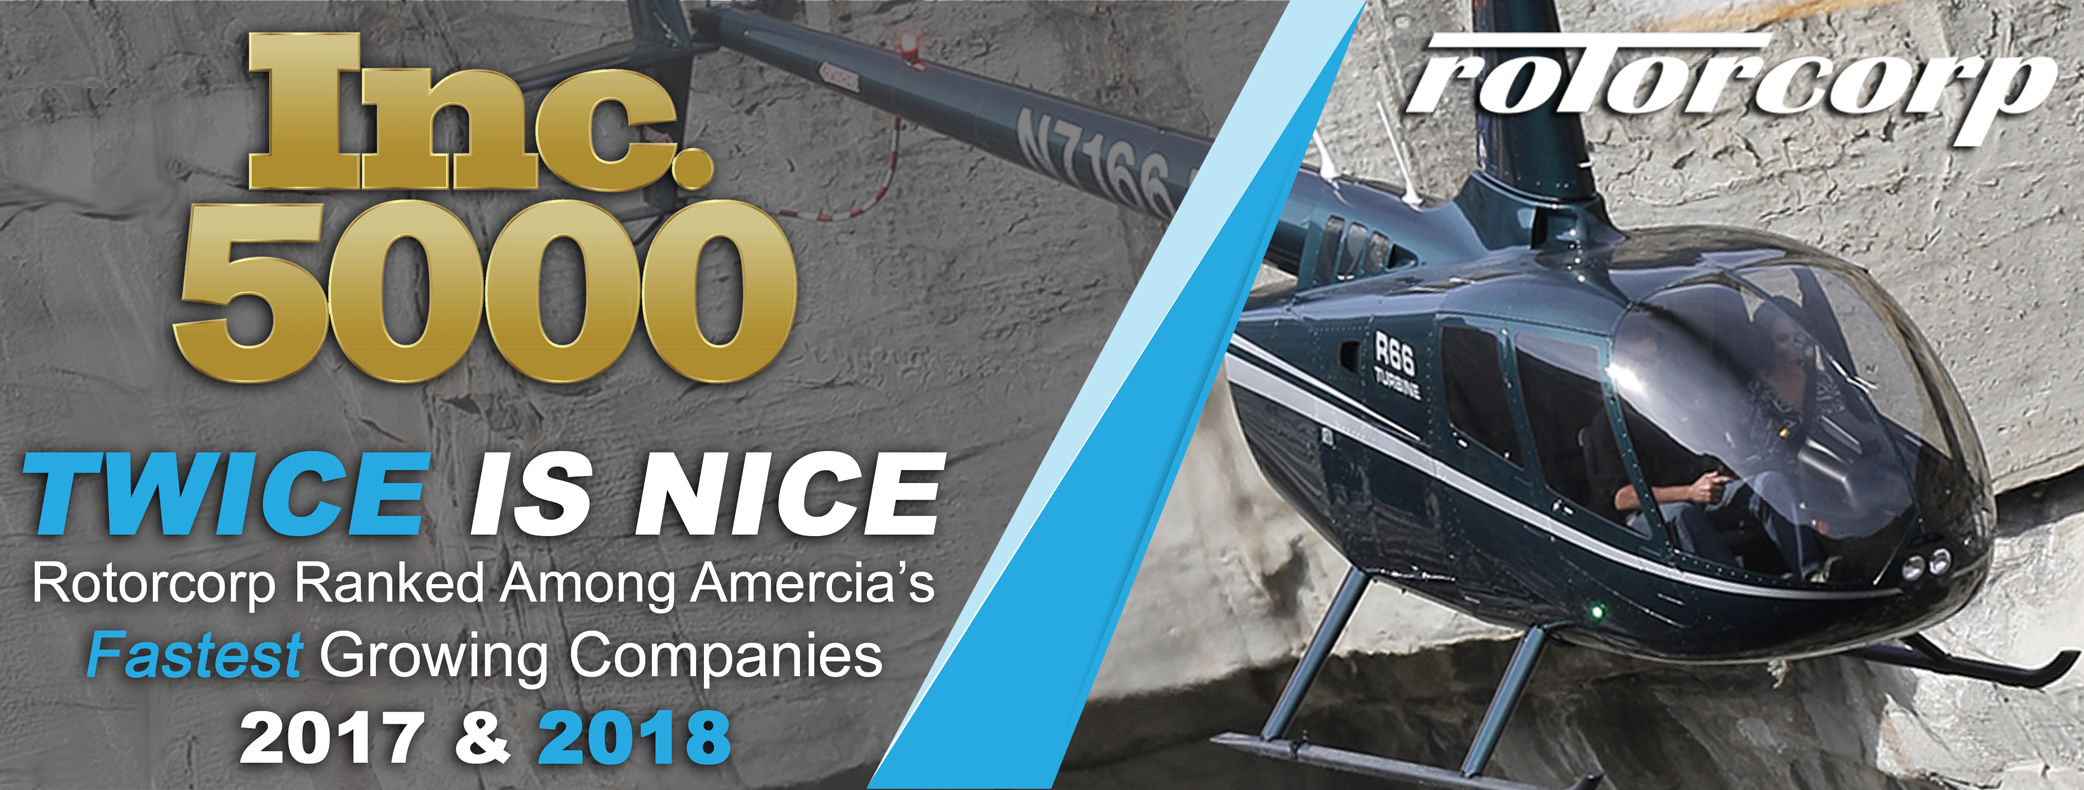 Atlanta Helicopter Parts Company Makes Inc. 5000 List Two Consecutive Years